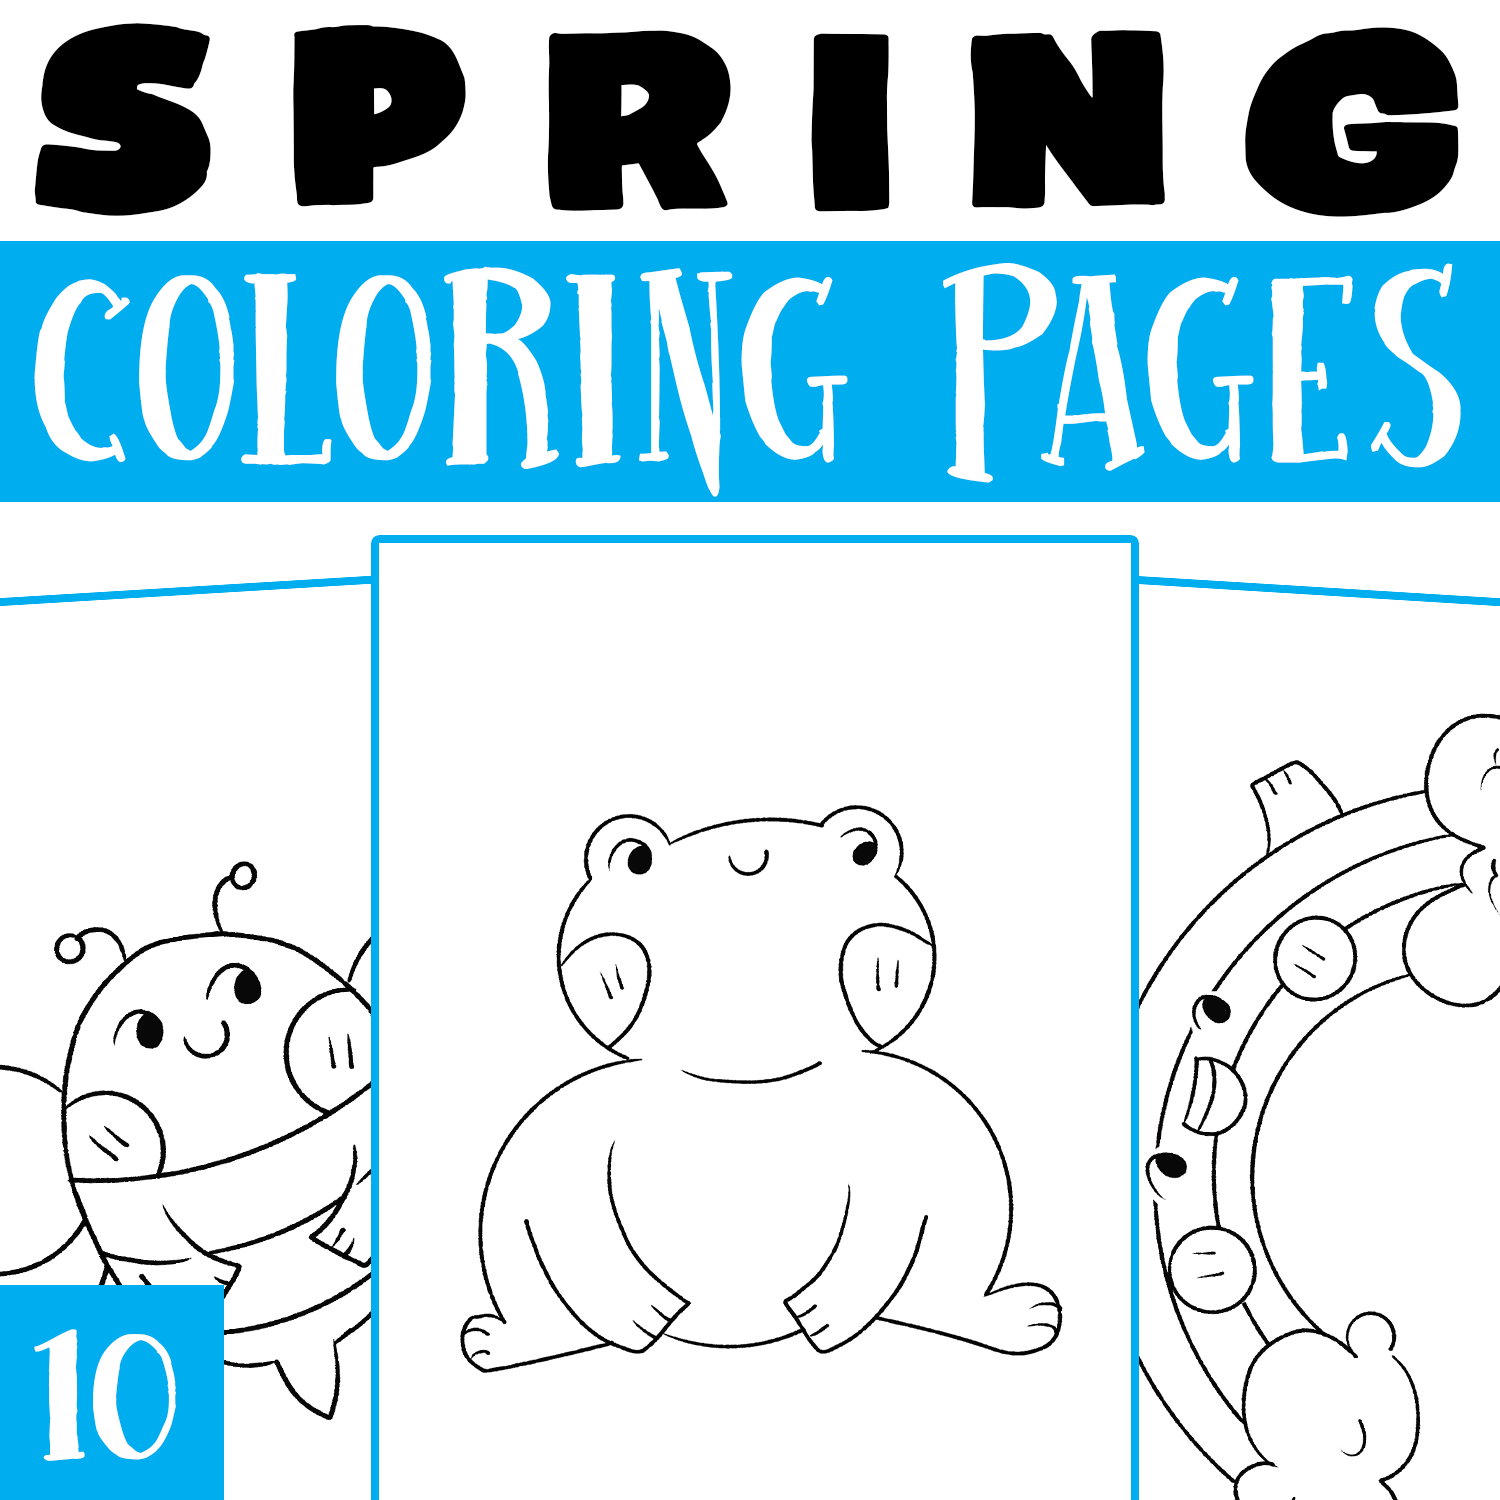 Spring coloring pages spring coloring sheets activity morning work for kids made by teachers